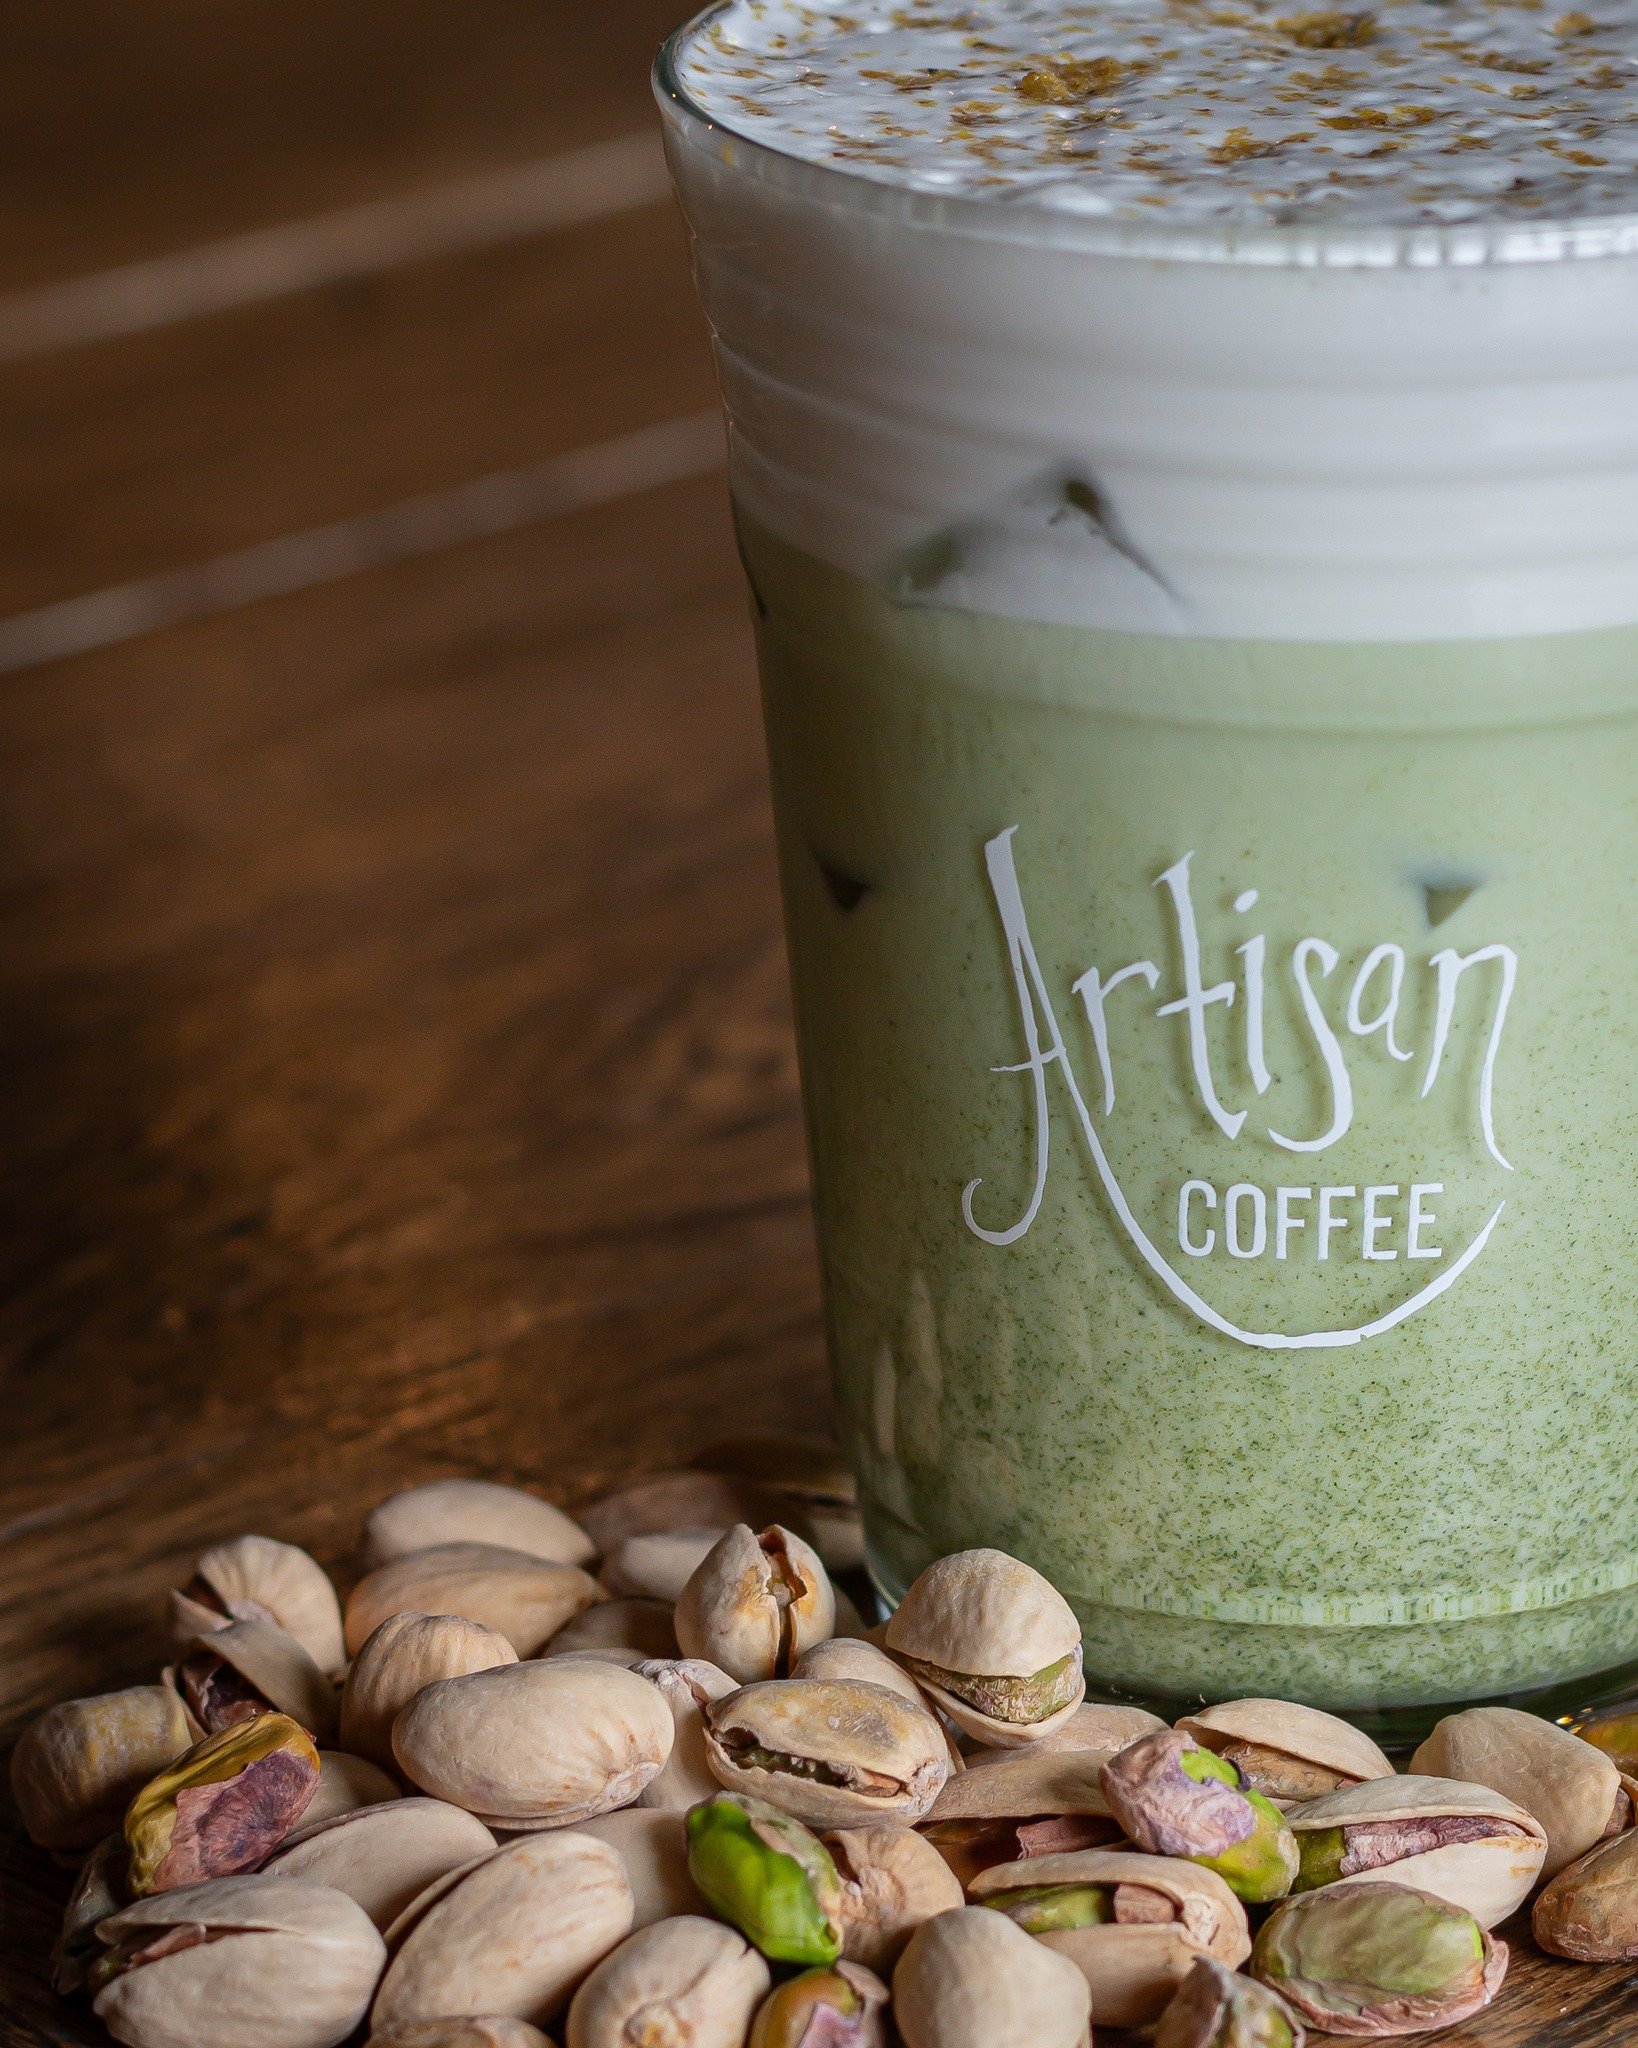 Are you loving our pistachio drinks? 😍

Here you can see our Pistachio Cream Matcha, made of matcha, house-made pistachio syrup, milk, and topped with pistachio cold foam and pistachio crumble. It's deliciously refreshing and perfect for these warme